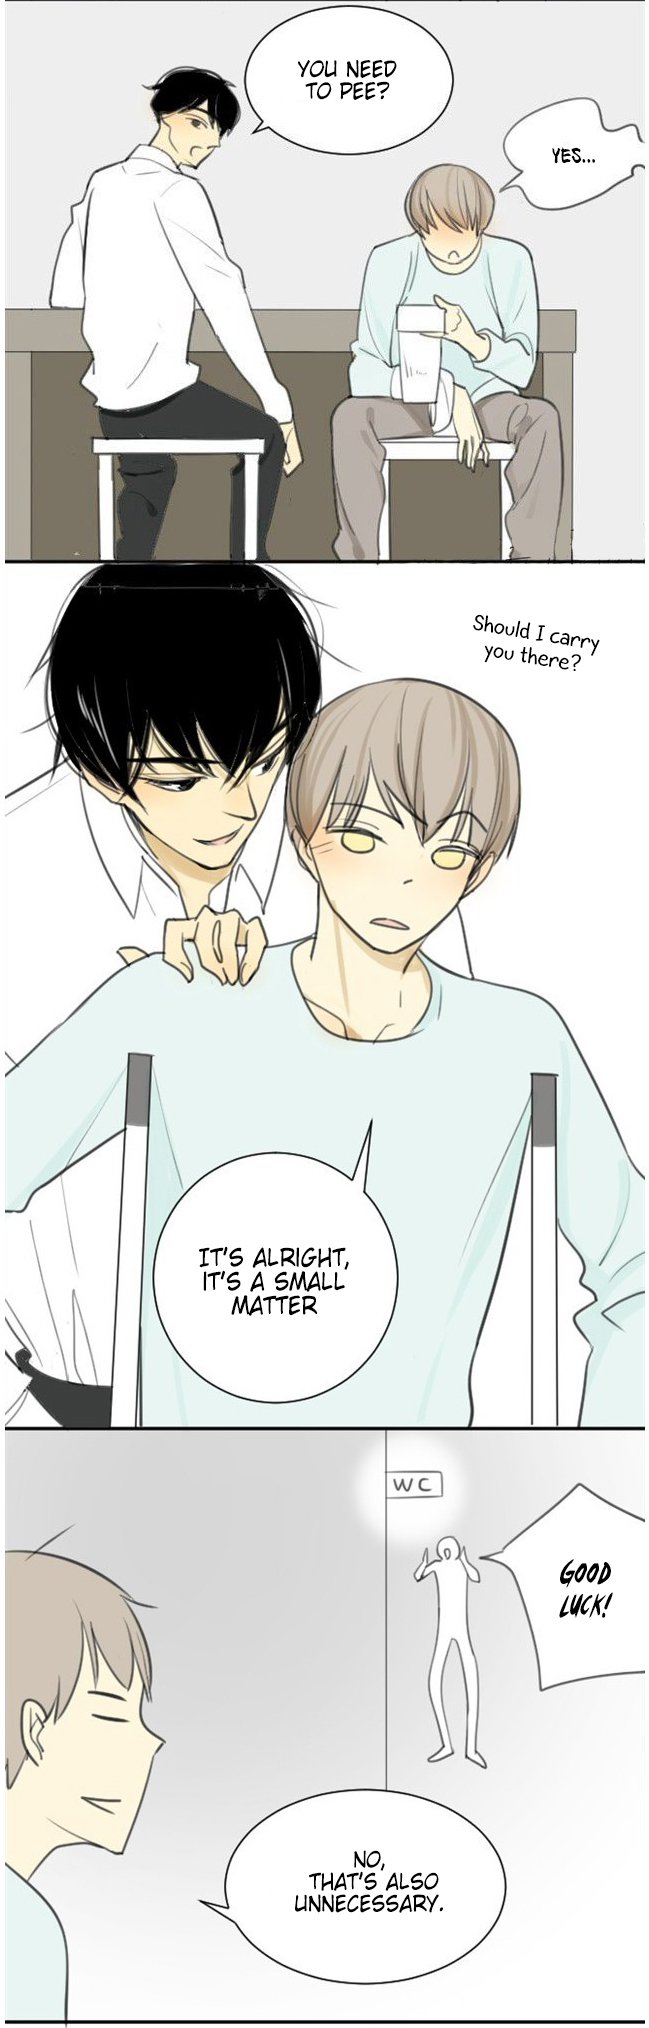 Classmate Relationship? Ch. 13 PART 1 I'LL CARRY YOU